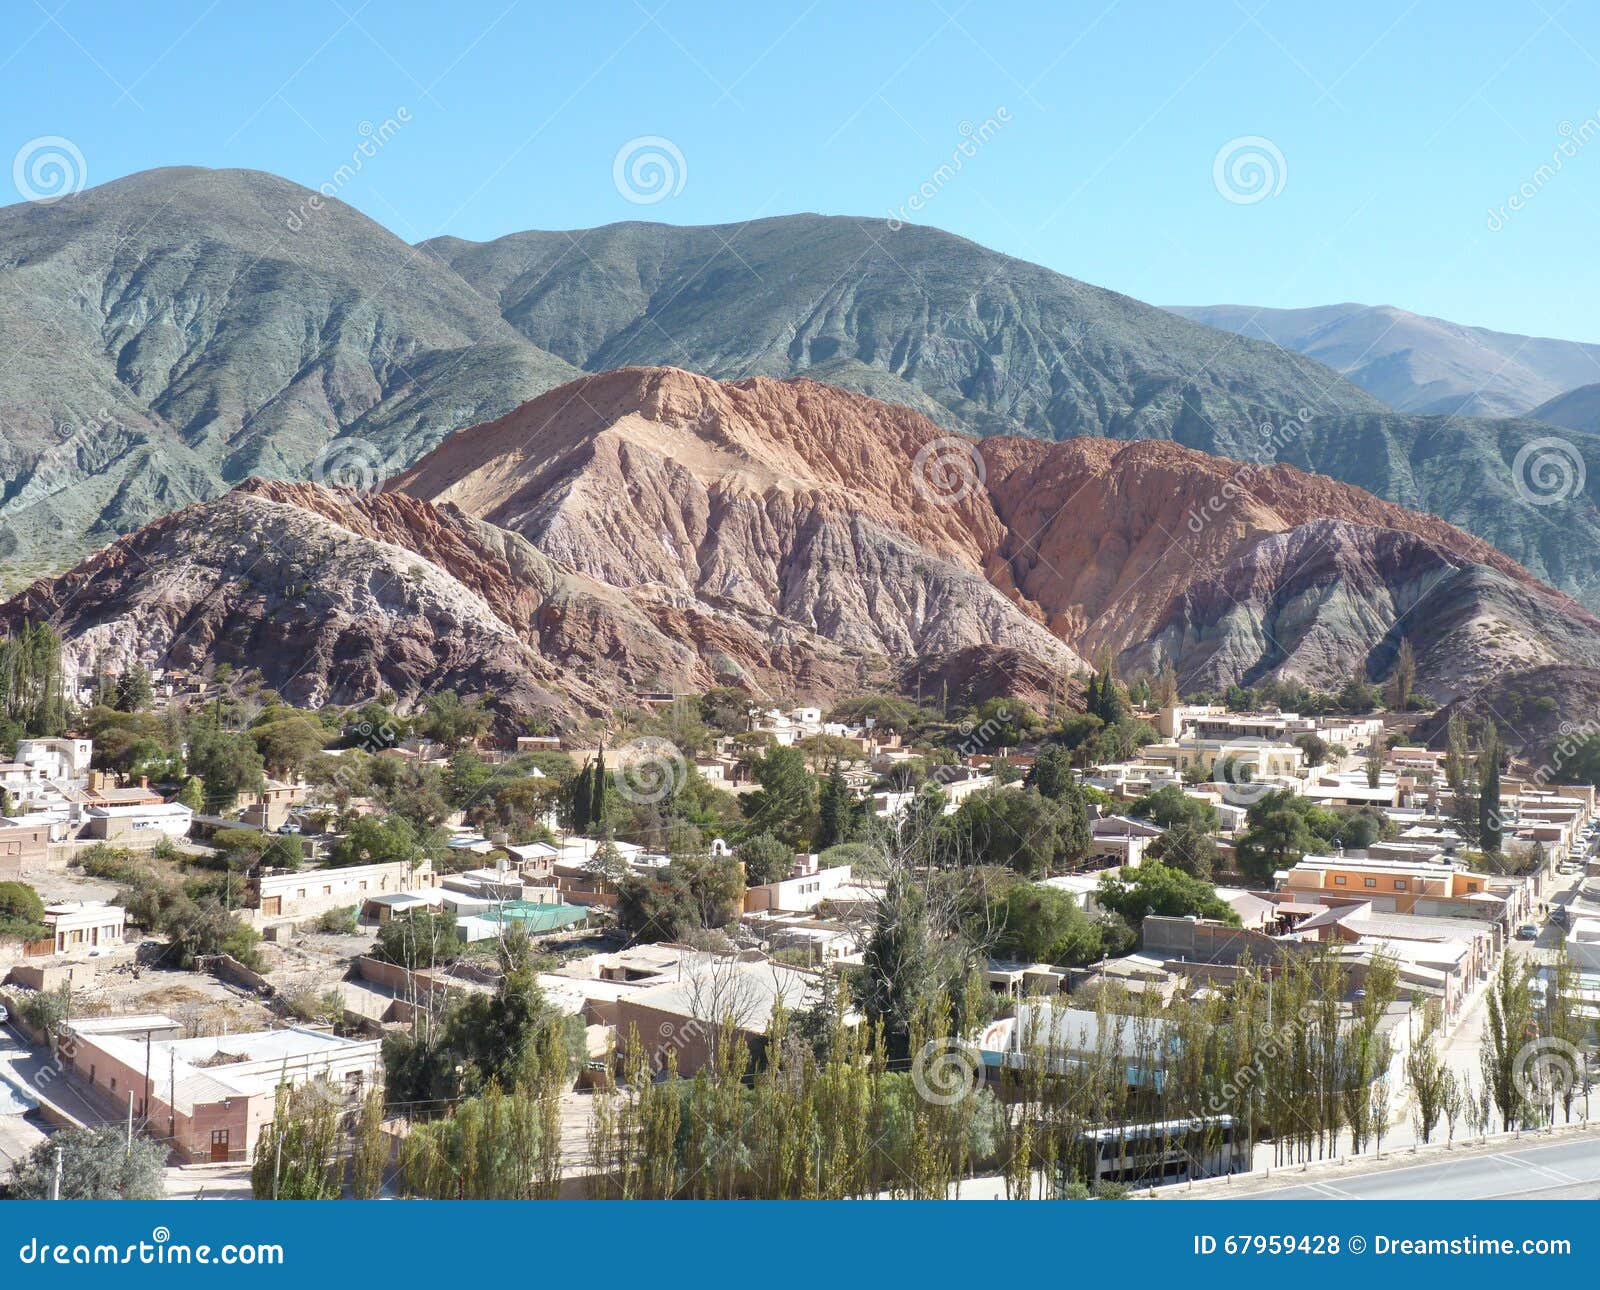 little town of purmamarca, jujuy, argentina